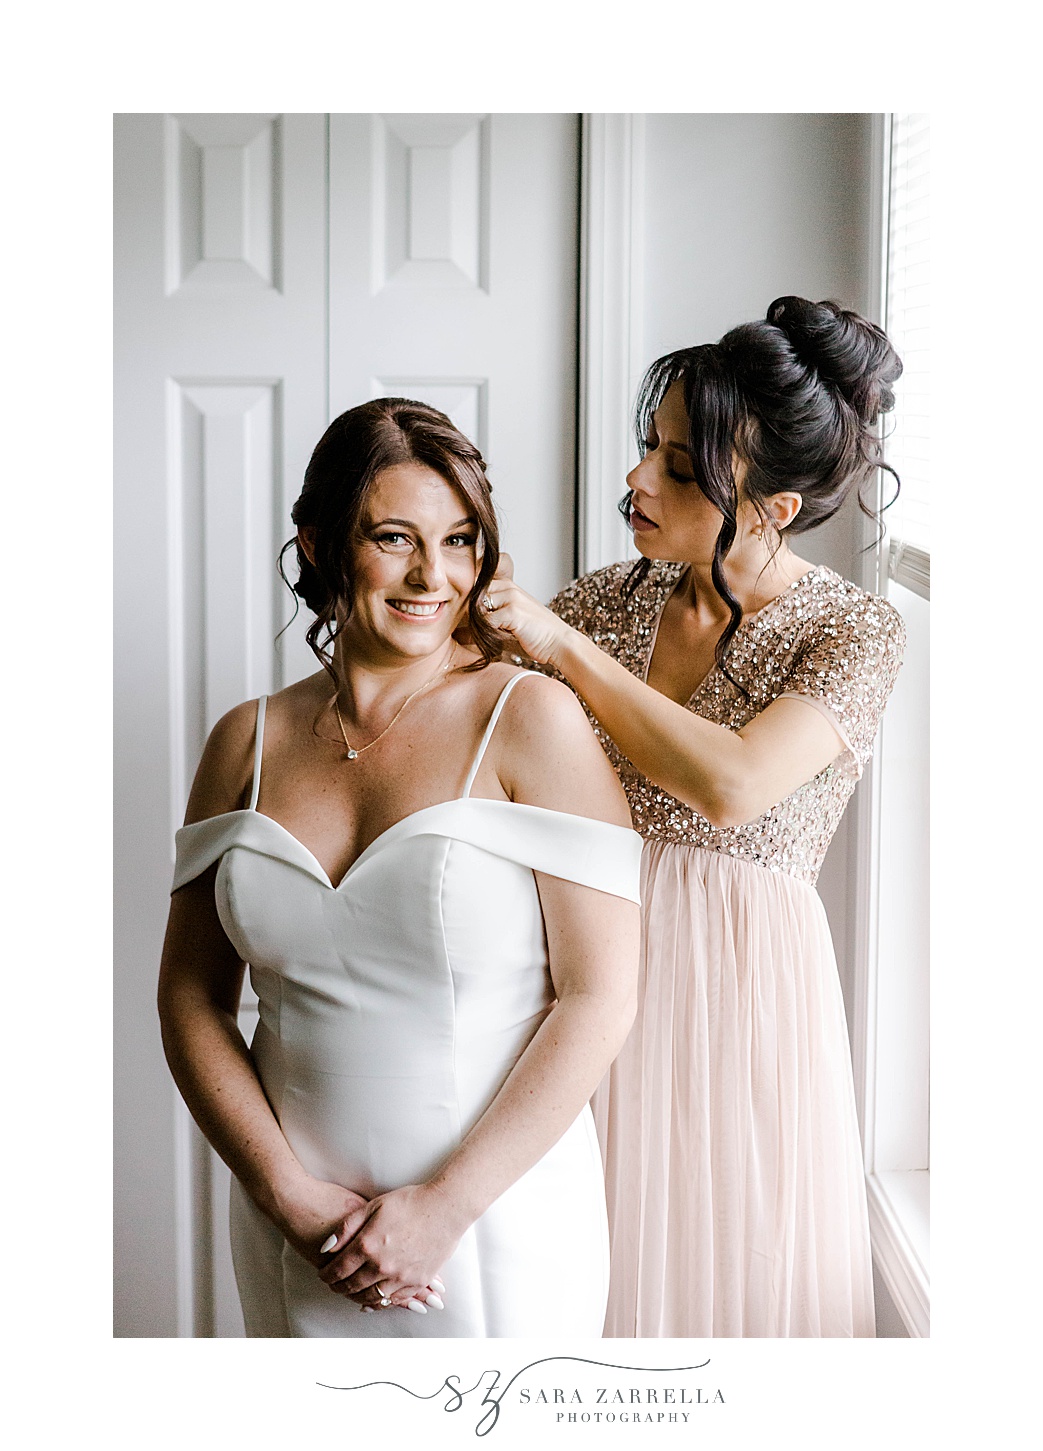 mother in peach dress helps bride with necklace and wedding dress